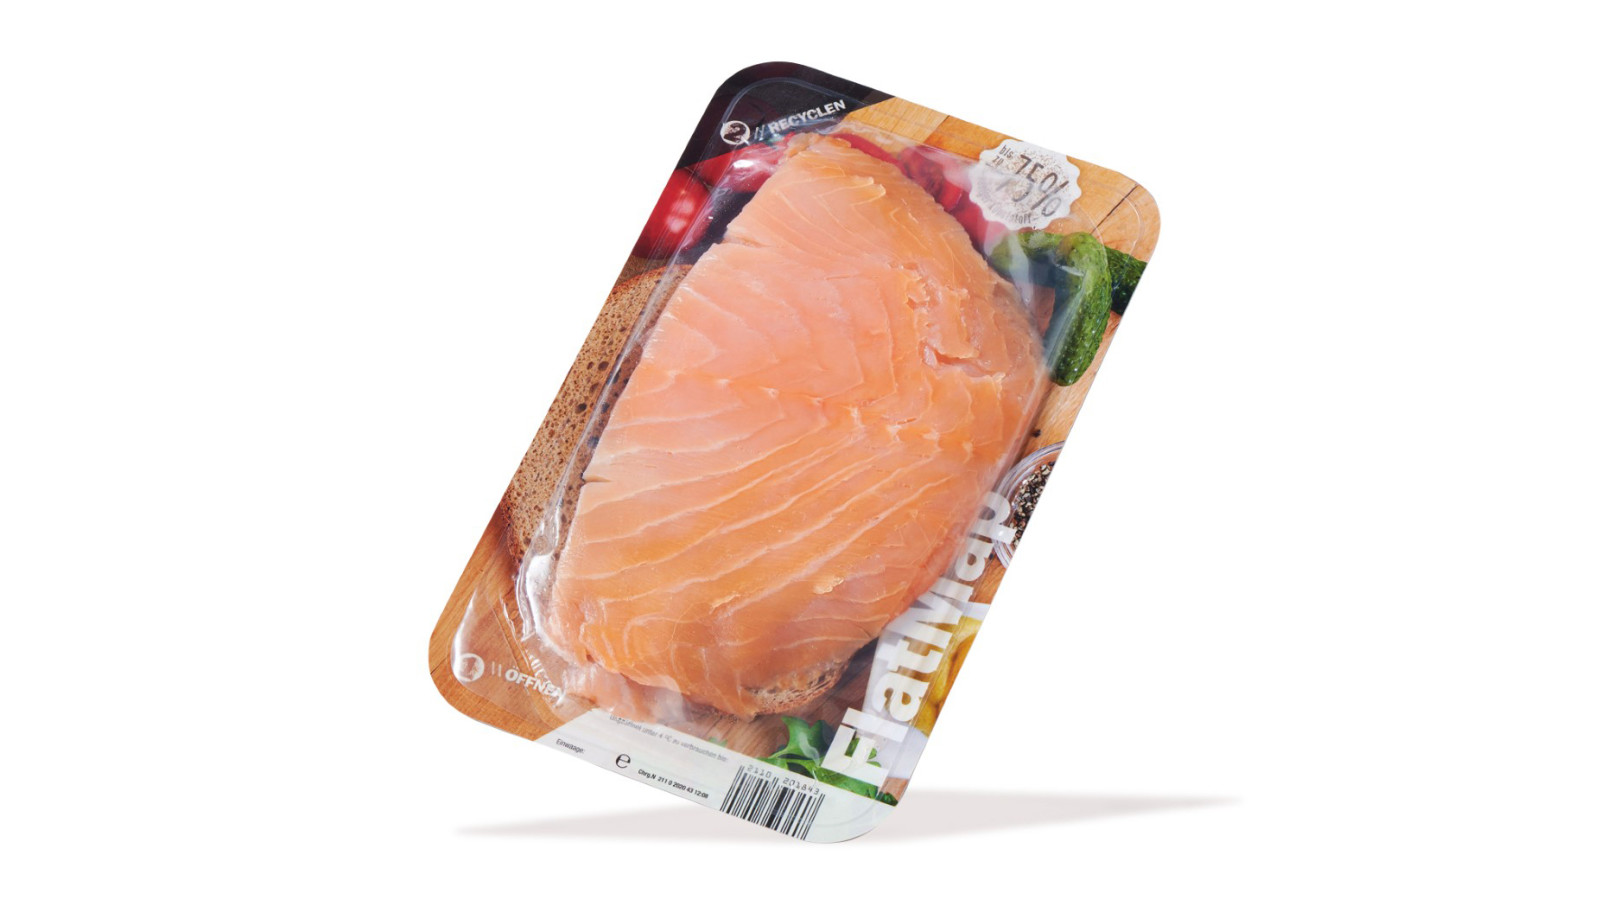 FlatMap from Nemco is the perfect solution for highlighting the product in the refrigerated display. We have a wide range of meat packaging, including for salmon and other fish, several of which are reusable or plastic-reduced skin pack products.